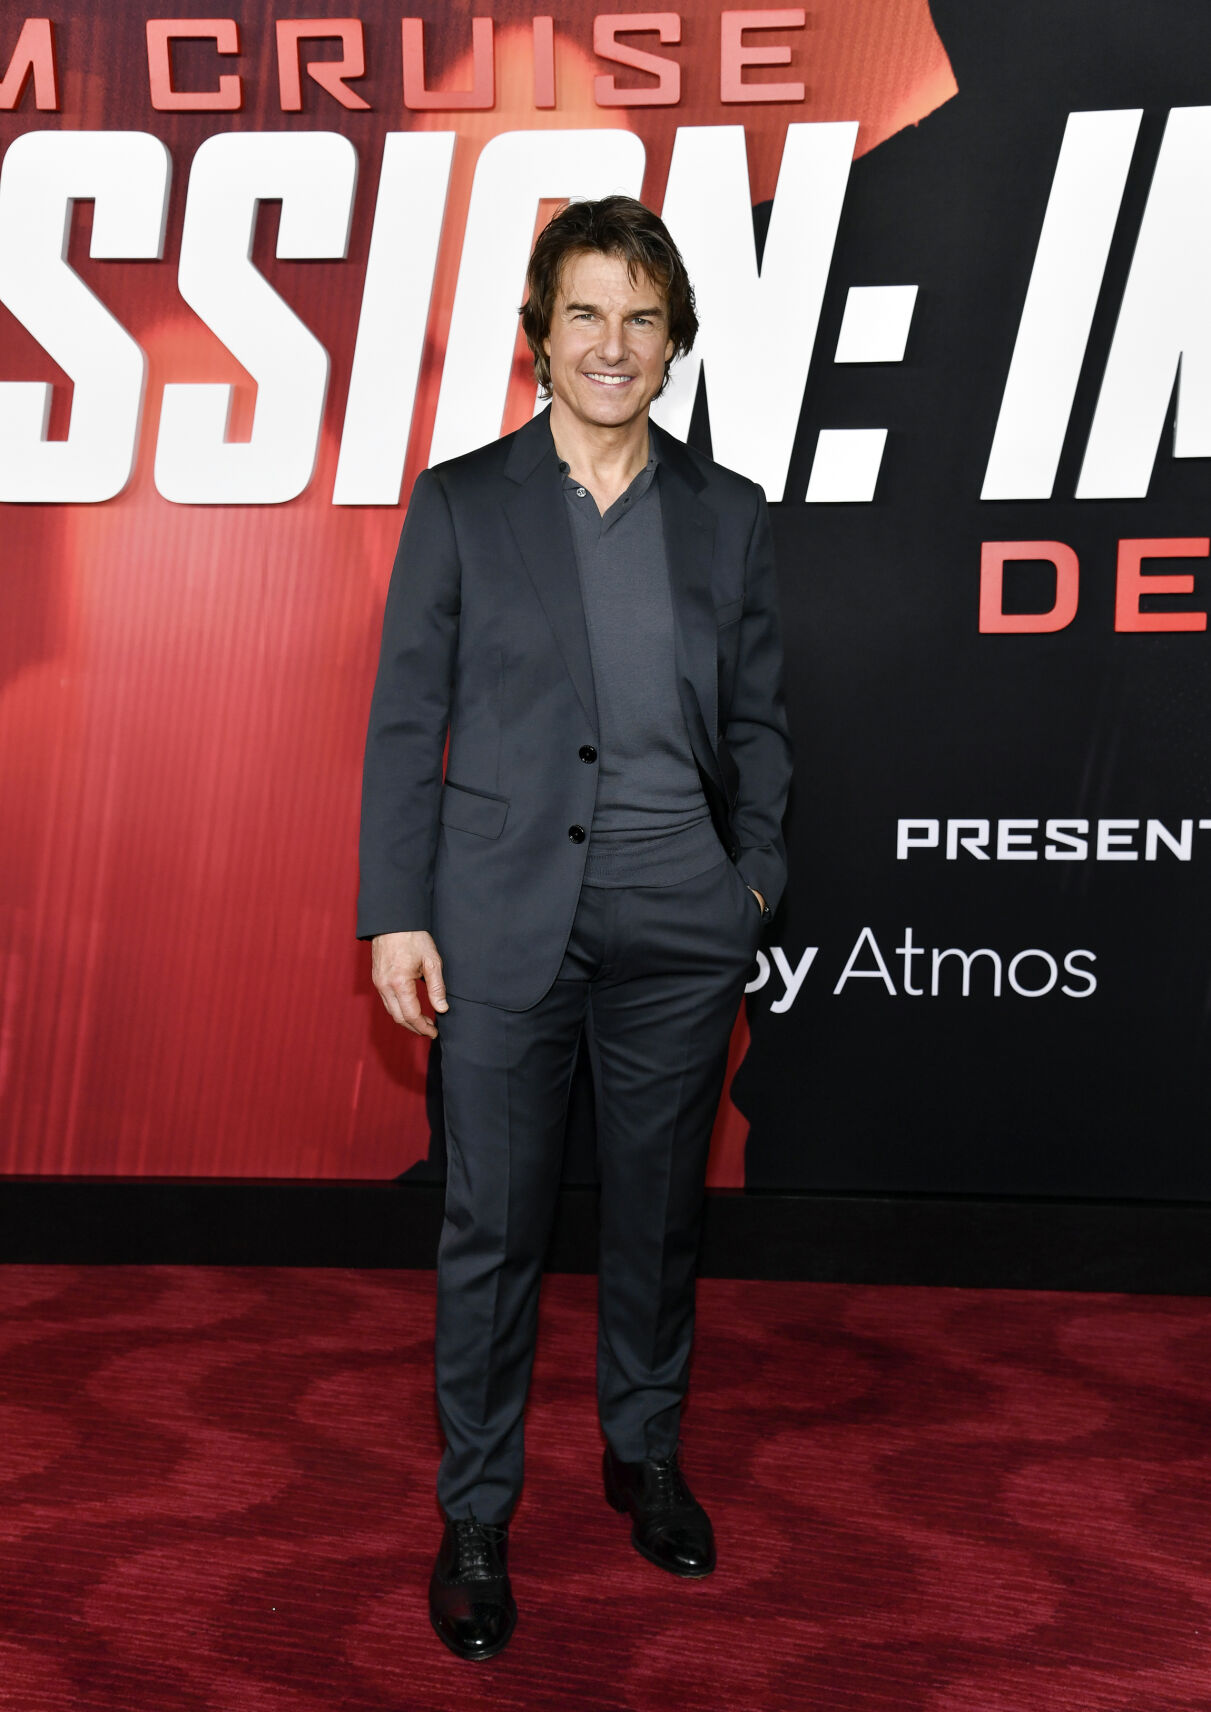 Tom Cruise at the premiere of "Mission: Impossible - Dead Reckoning Part One" held at Rose Theater, at Jazz at Lincoln Center's Frederick P. Rose Hall on July 10, 2023 in New York, New York.